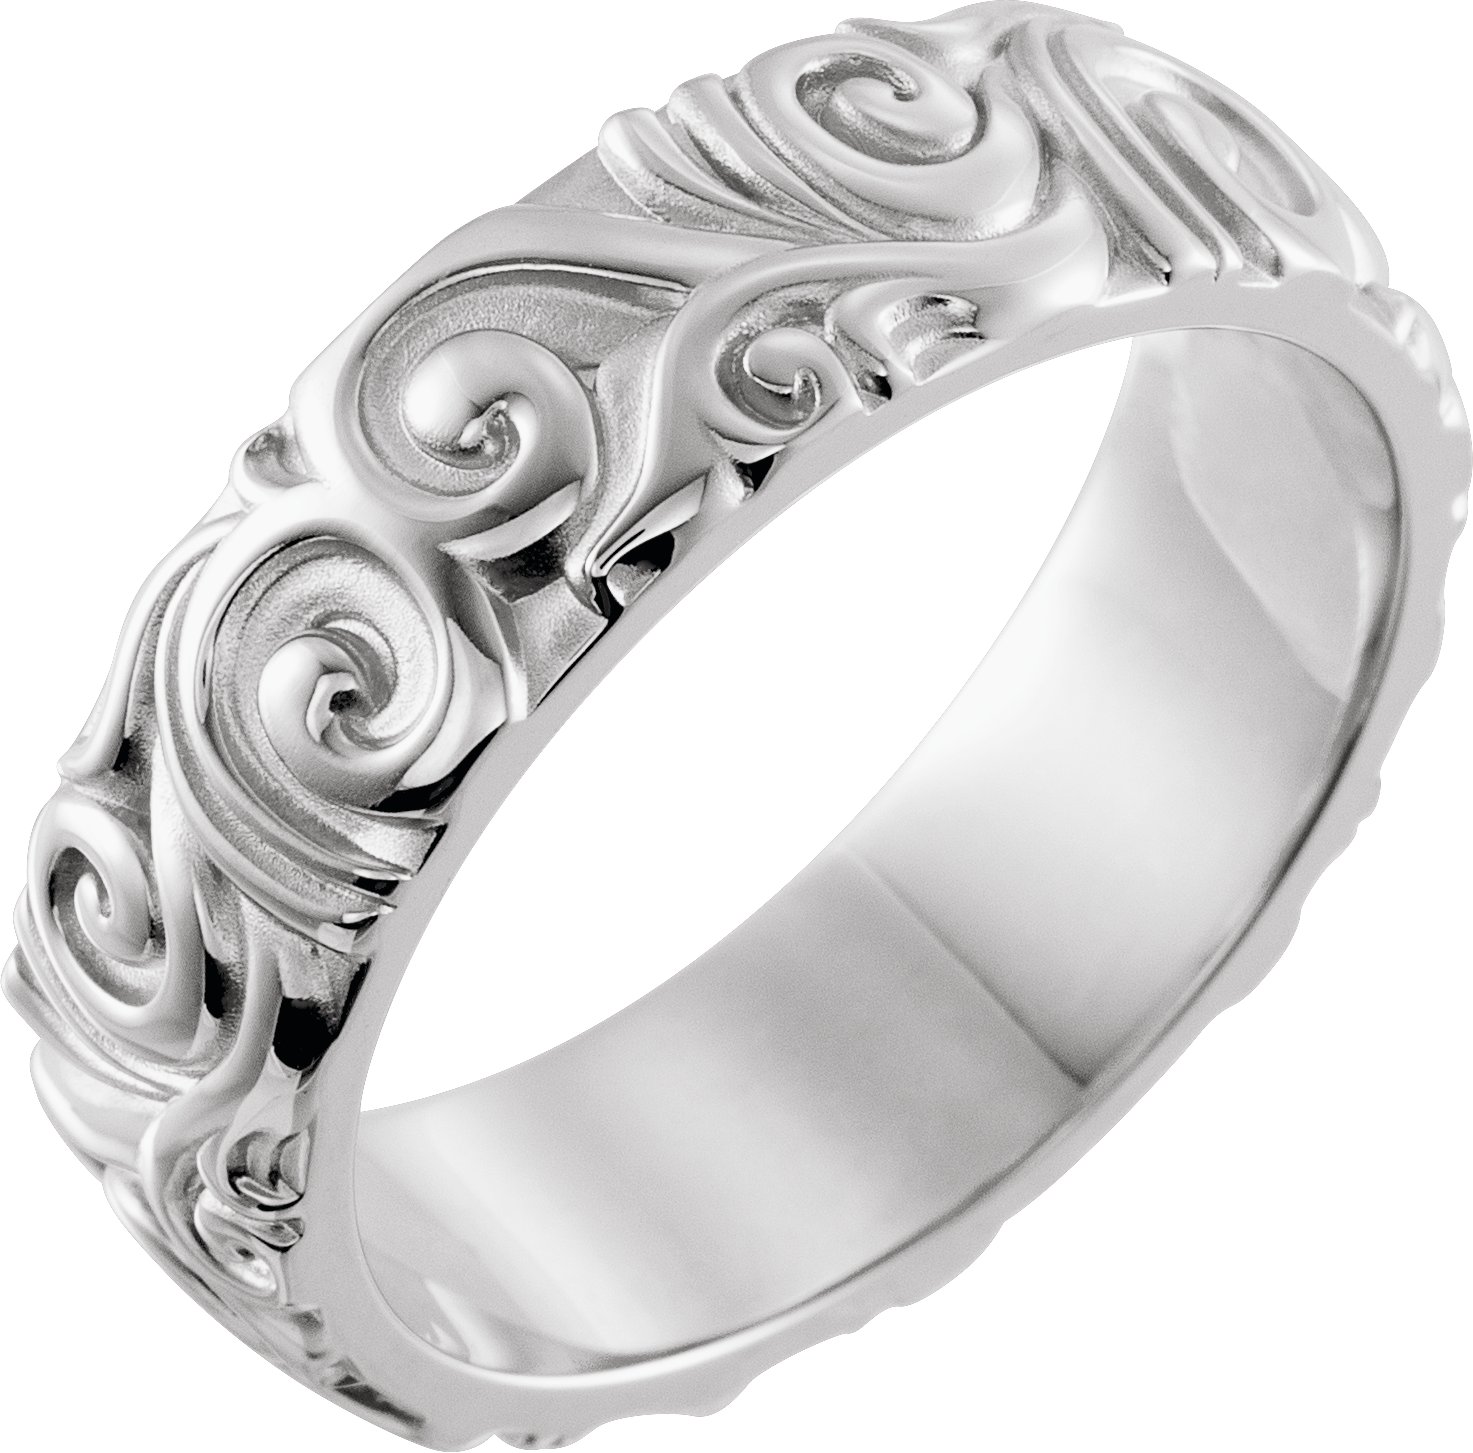 Continuum Sterling Silver 6 mm Sculptural Band Size 8